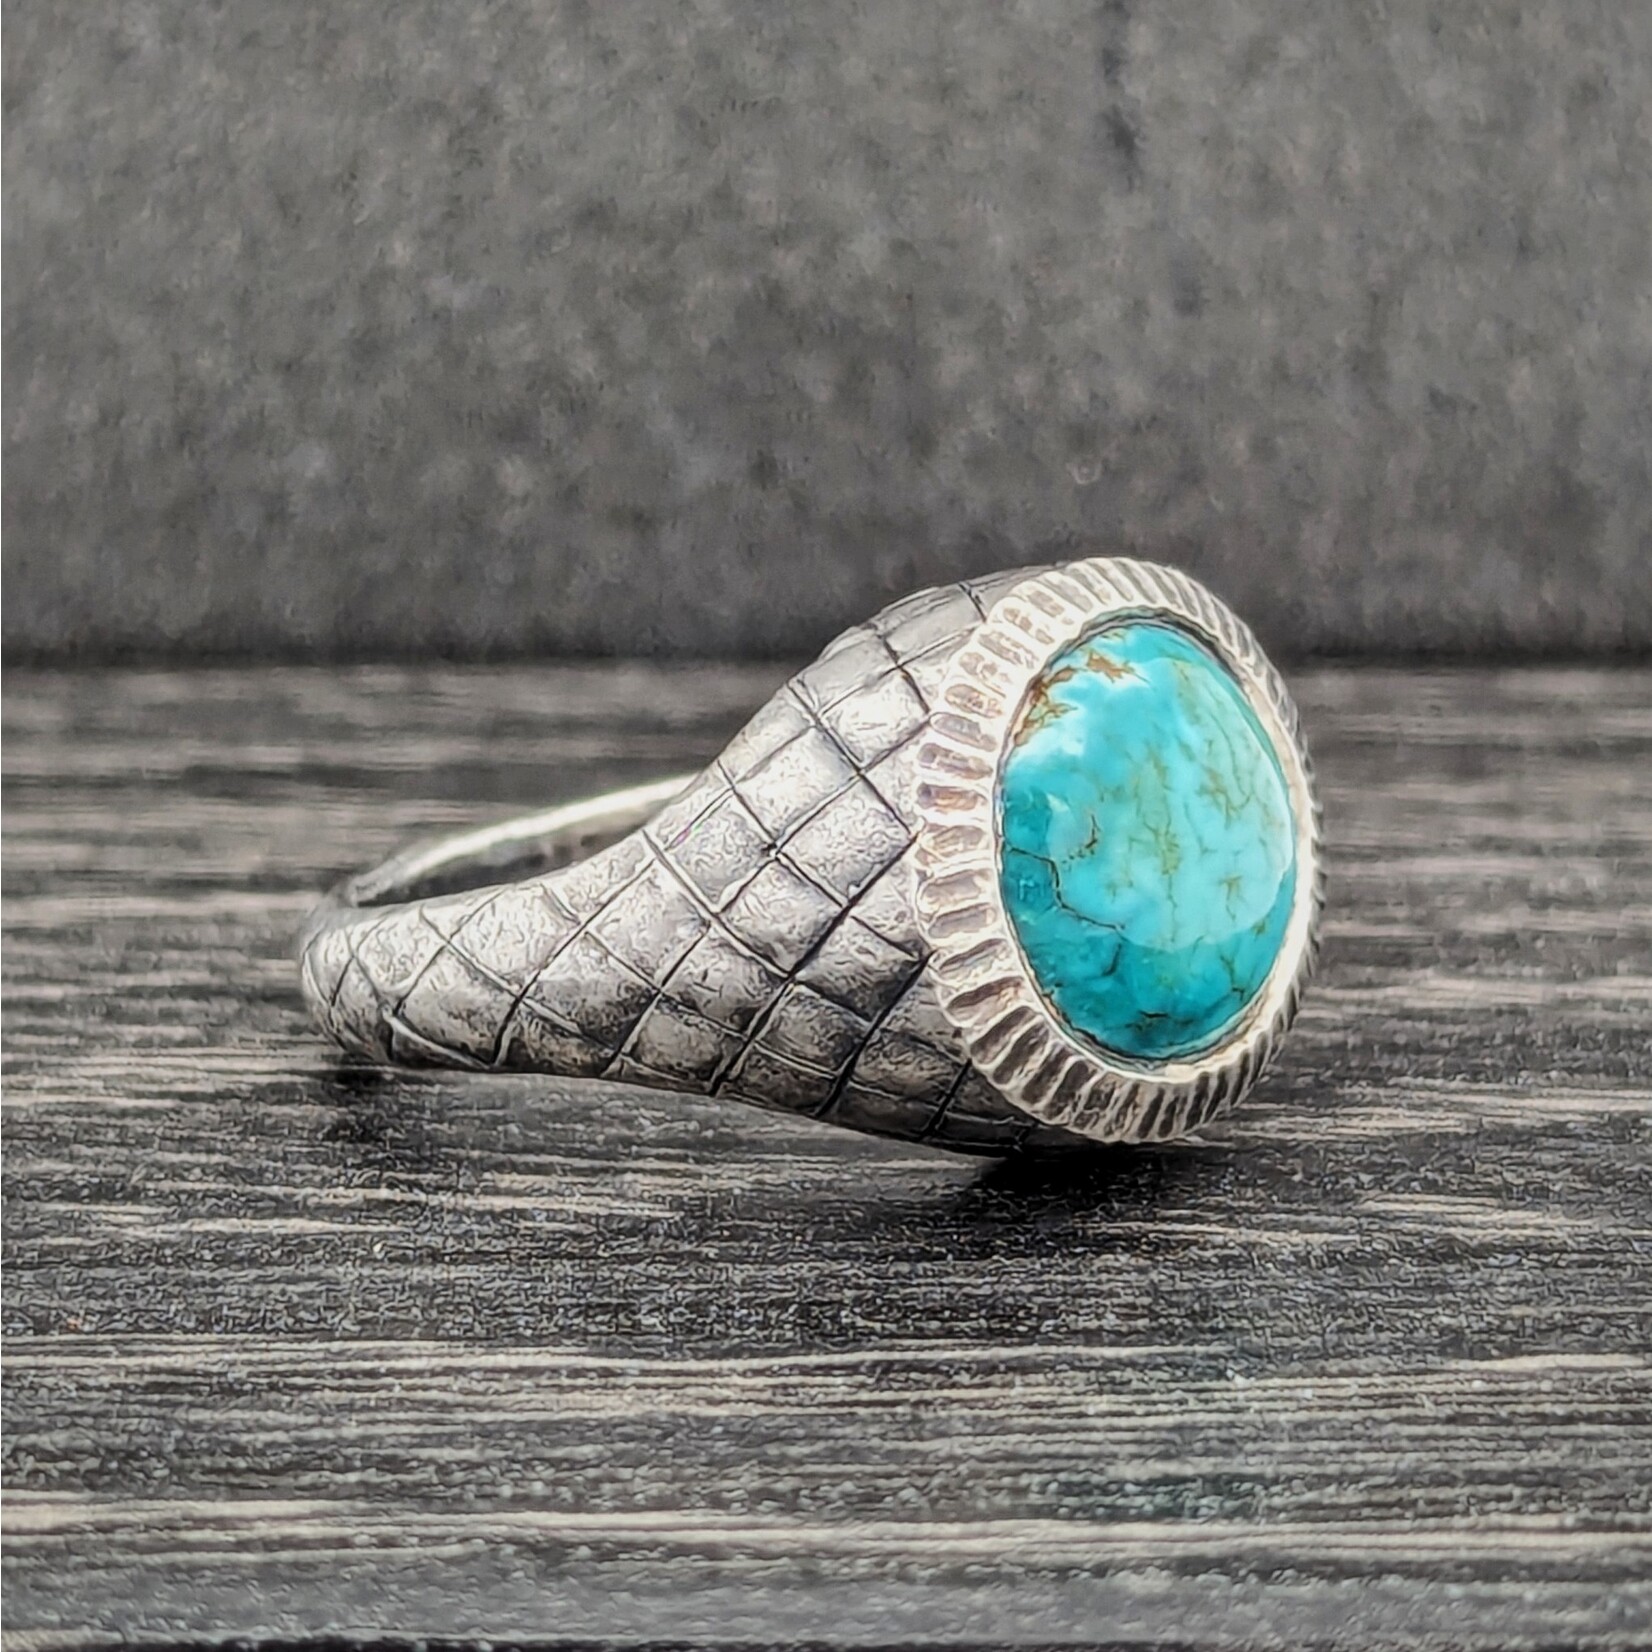 Carrie Nunes Jewelry Diamond Quilt Patterned Ring w/ Turquoise